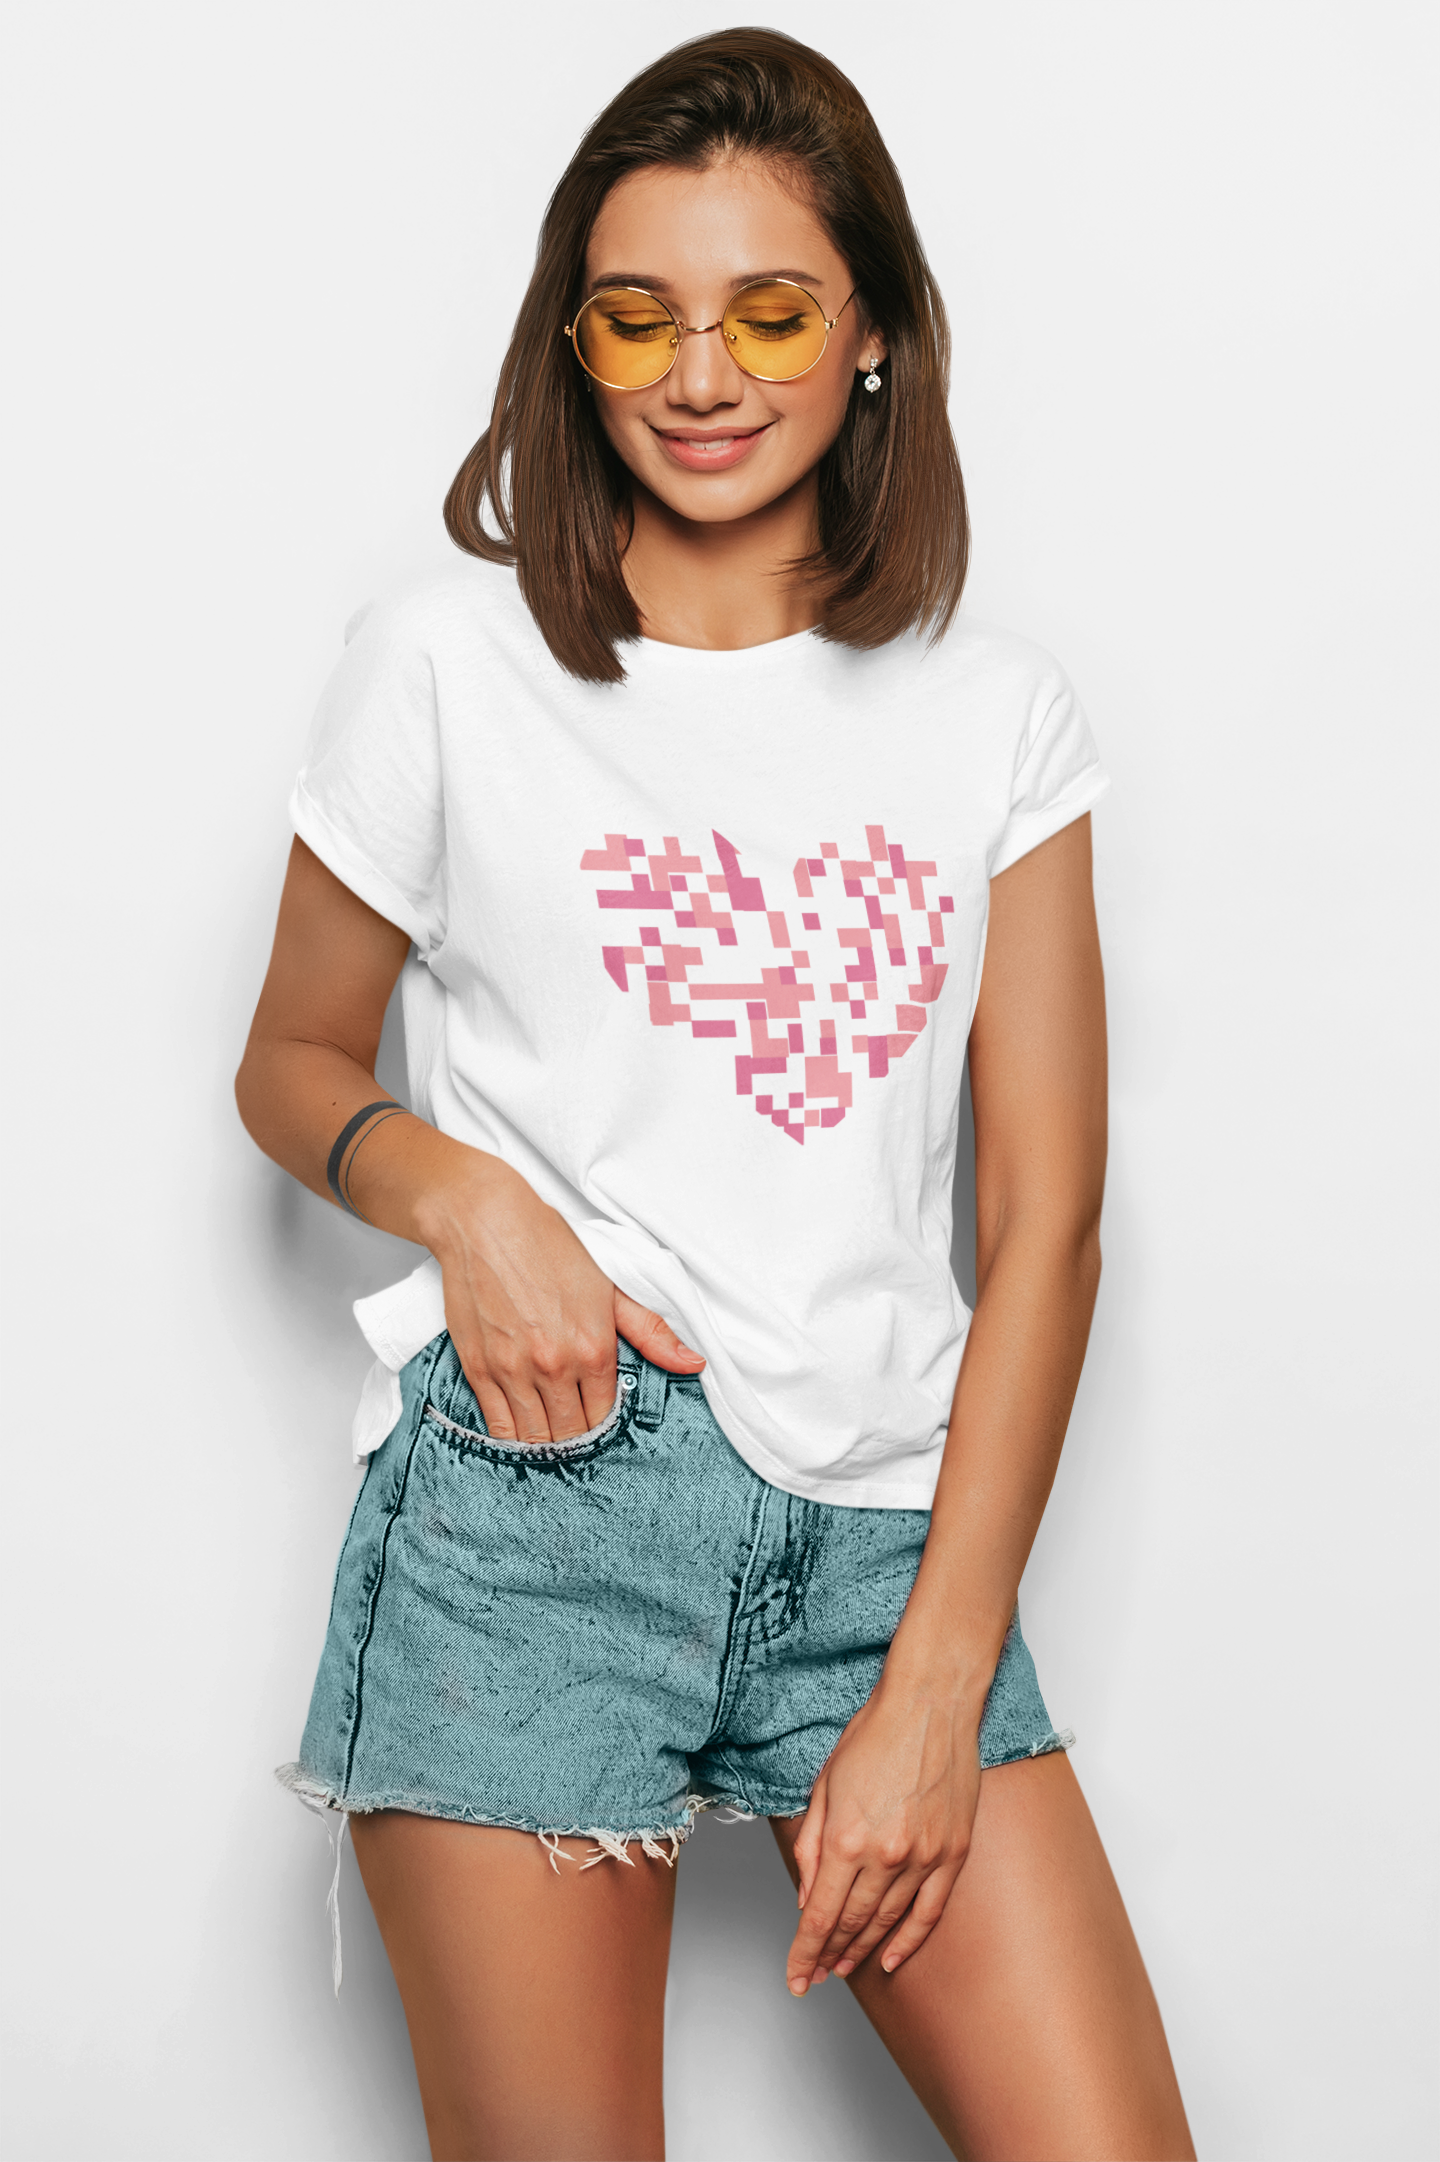 WOMEN'S T-SHIRT WHITE: HEARTS PATTERN AT CENTER